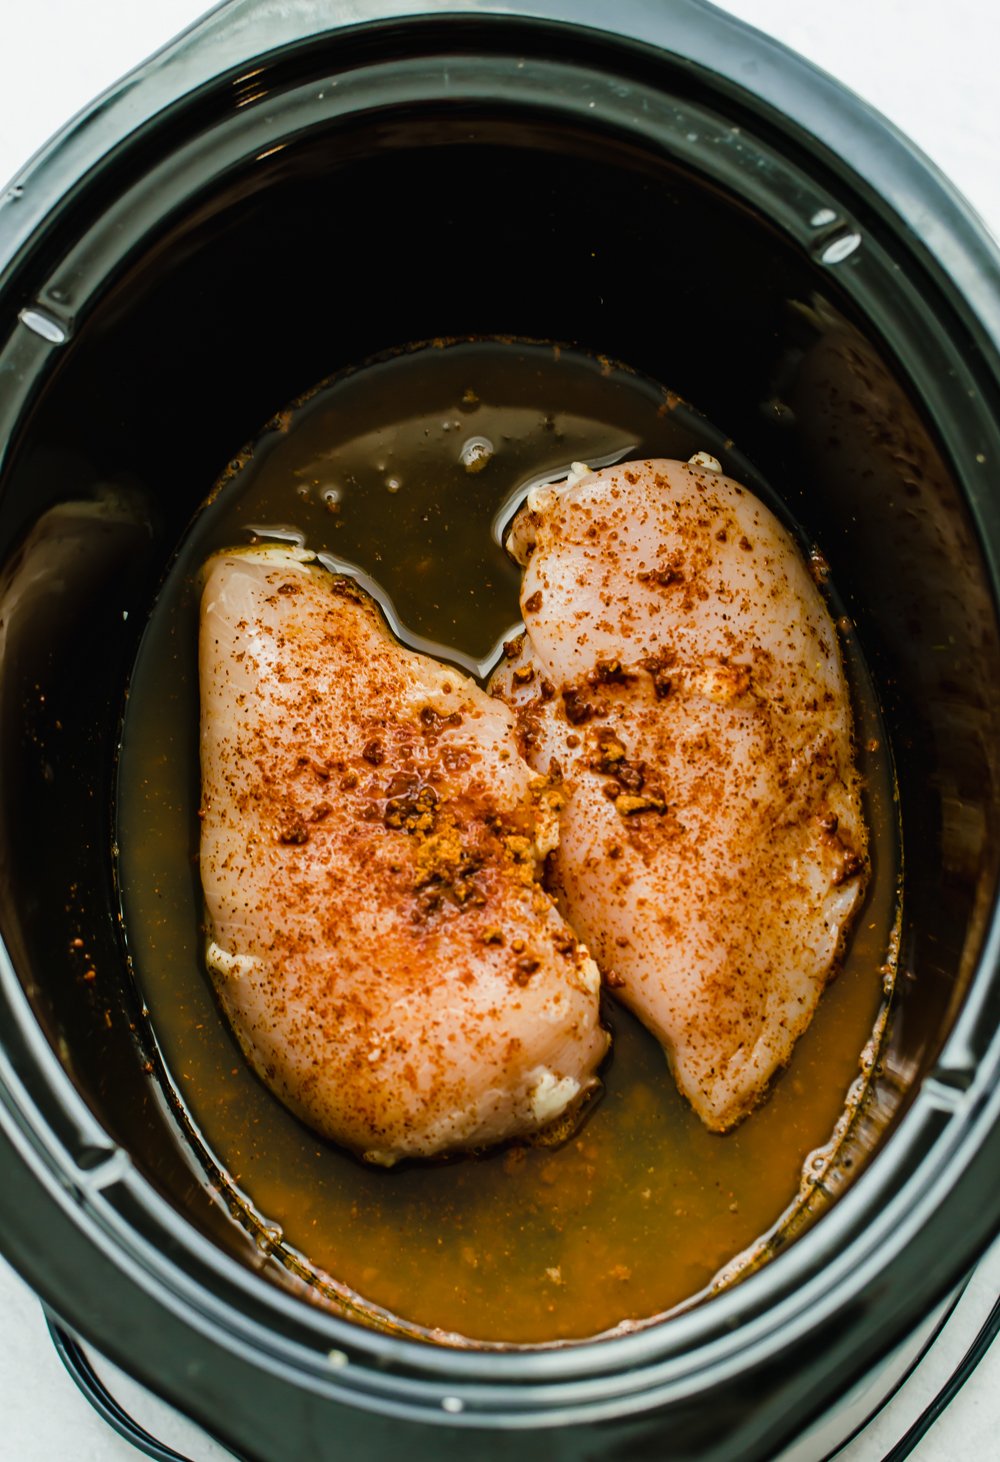 Raw chicken breasts with Mexican seasonings in a slow cooker with broth around it.